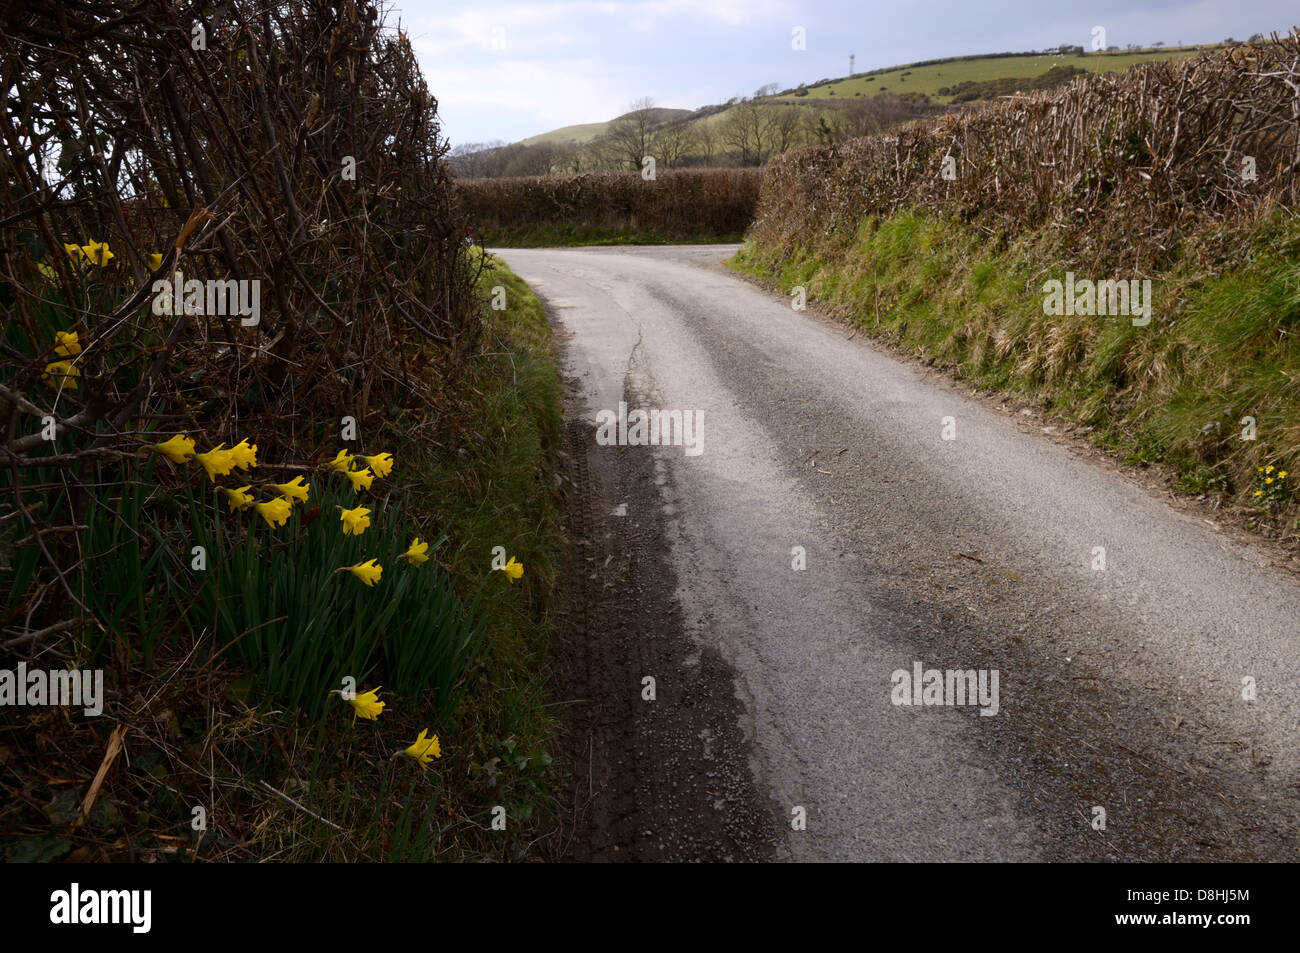 Wild Daffodils Narcissus pseudonarcissus, growing by a country lane, Wales, UK Stock Photo